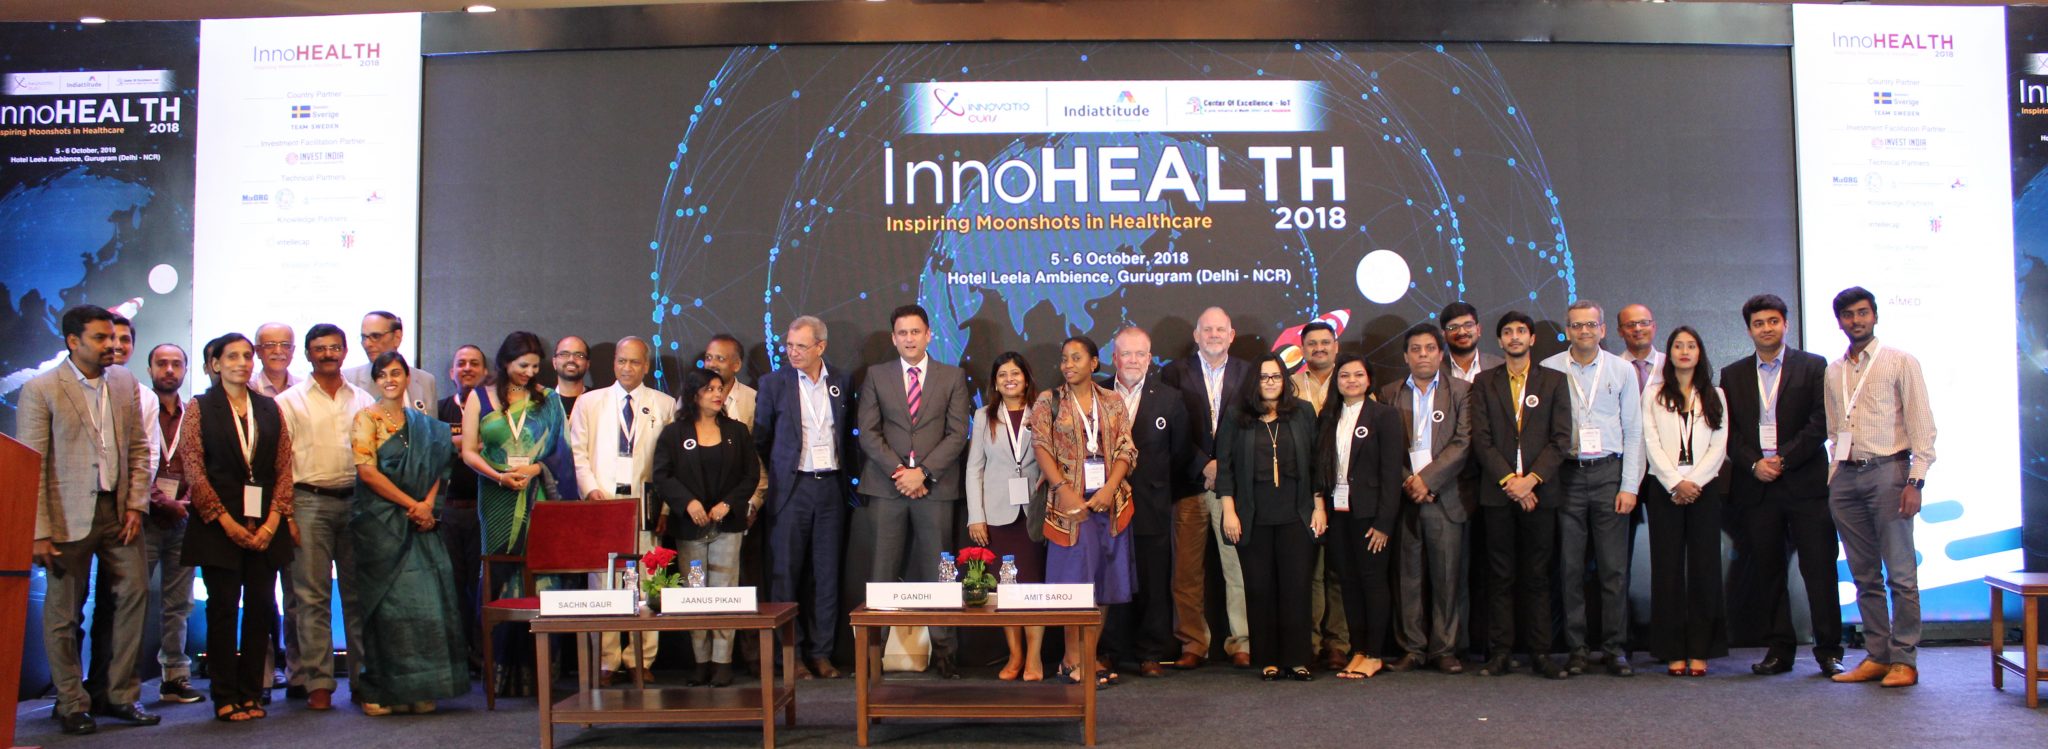 InnoHEALTH 2018 conference group photo